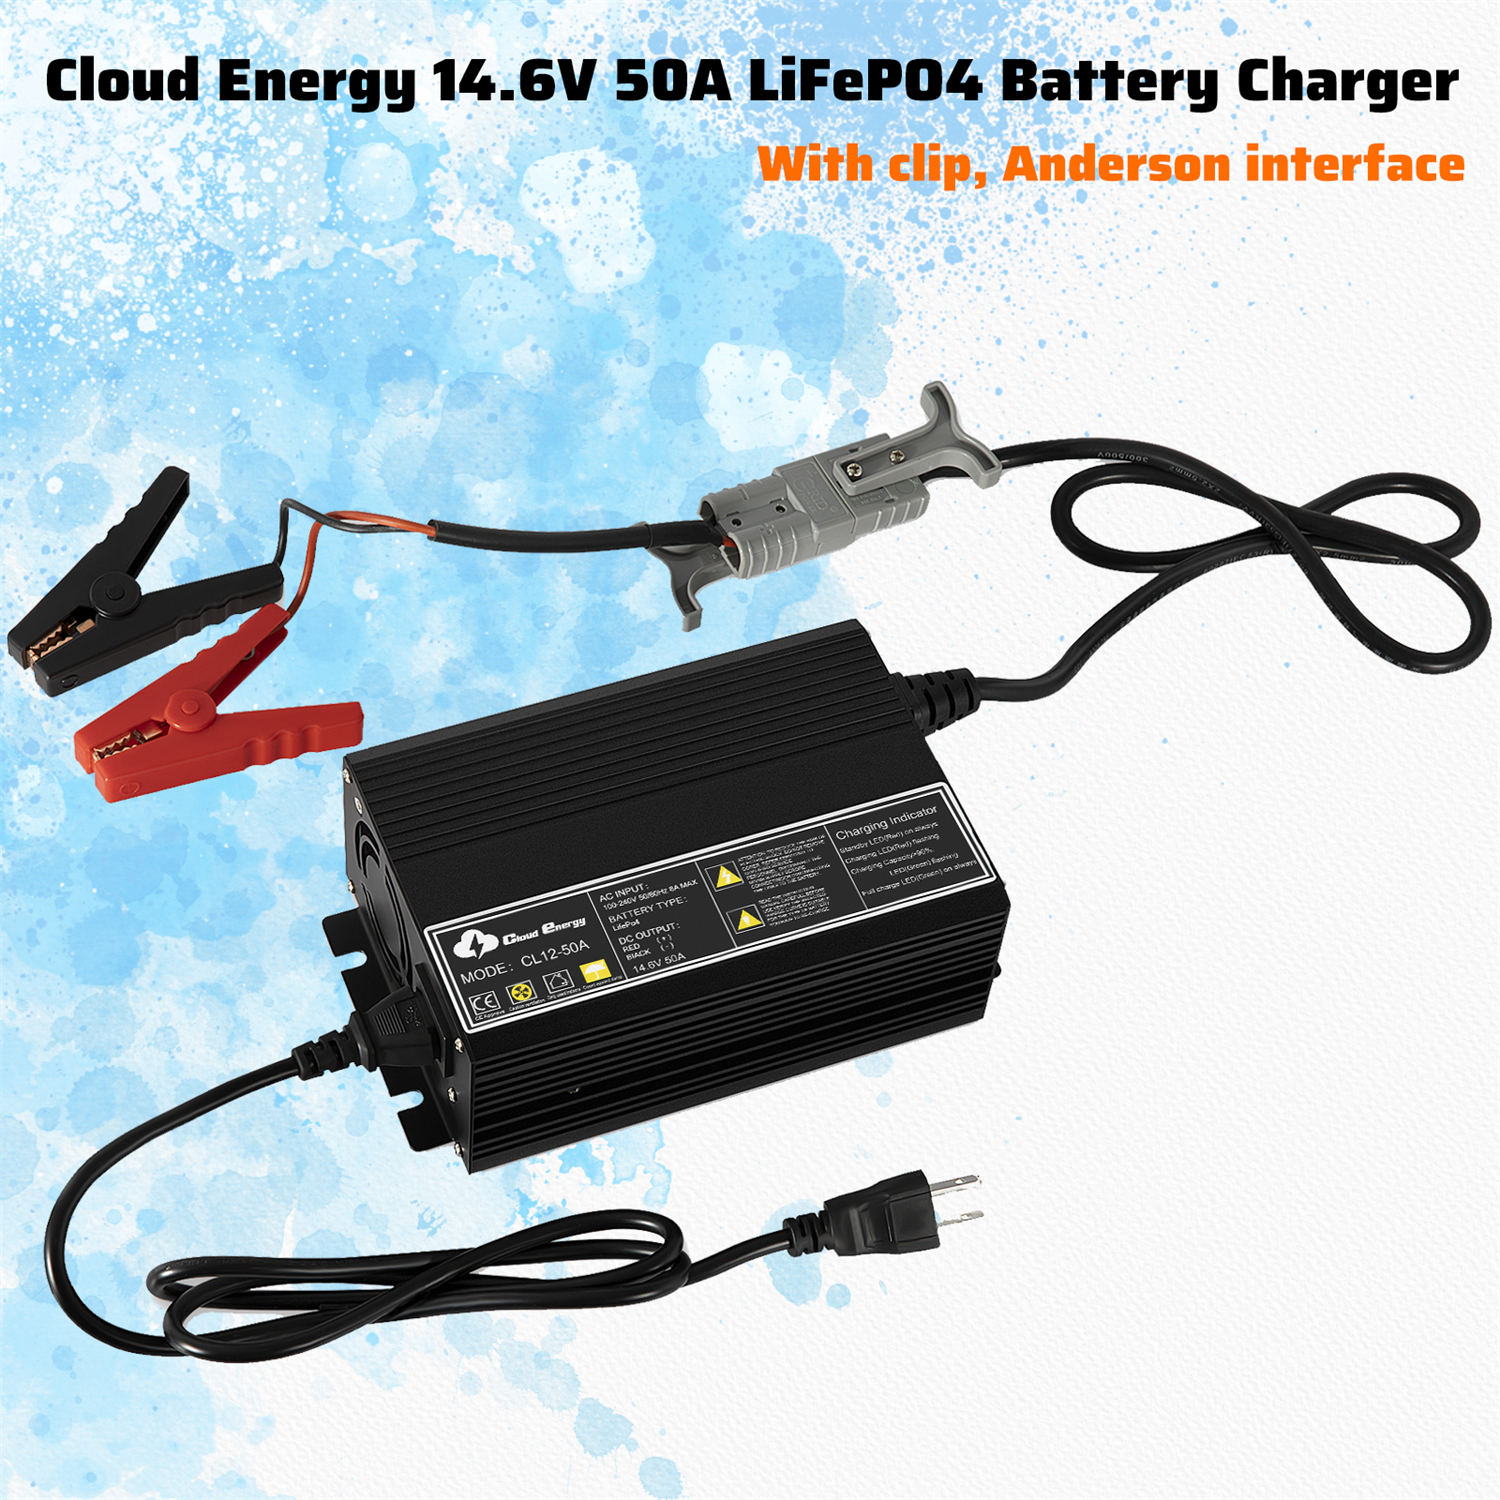 Cloudenergy 12V-50A Battery Charger Side View